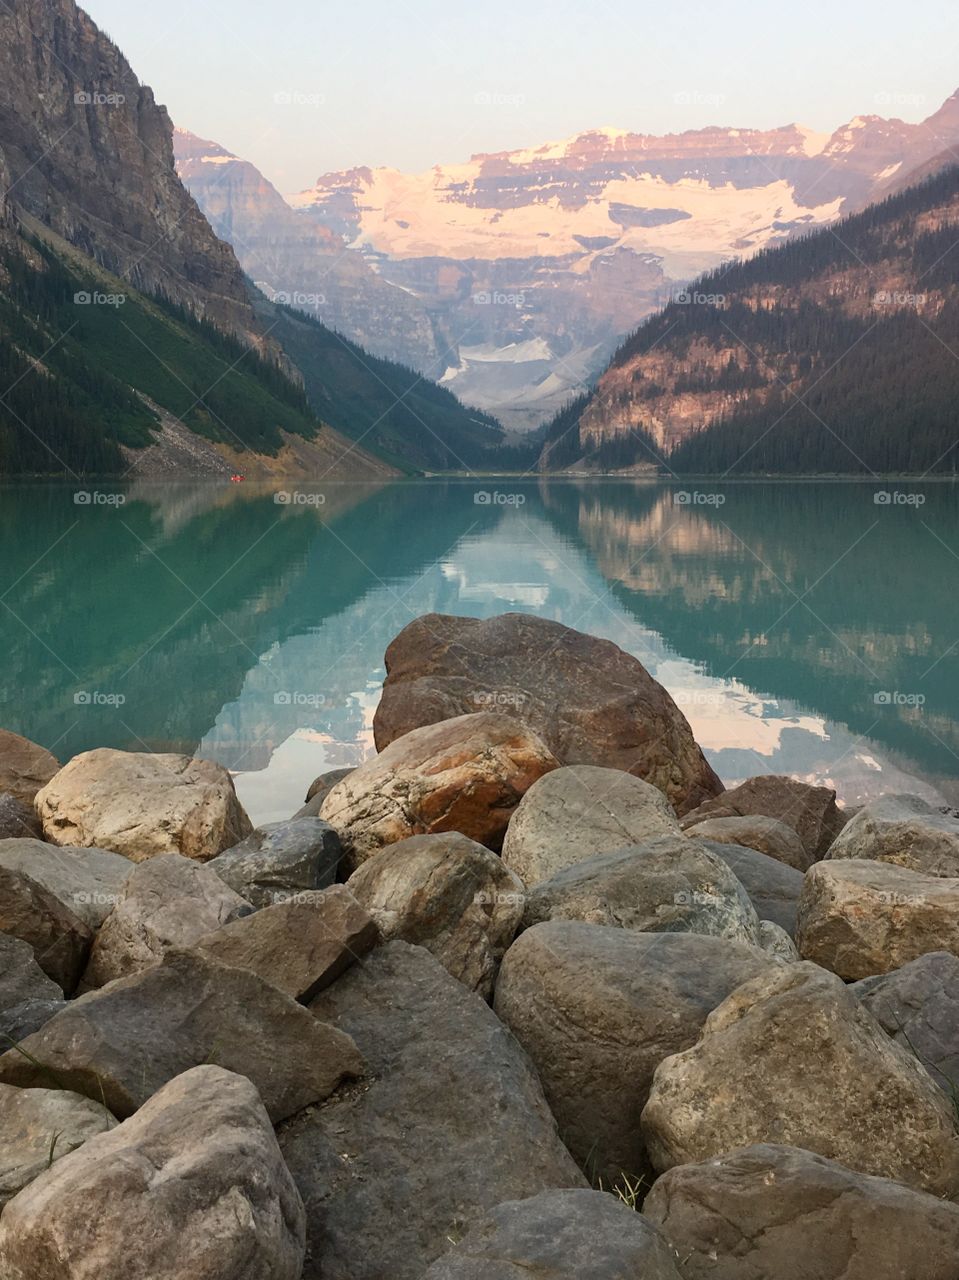 Stunning Lake Louise at Banff National Park in Calgary, Alberta; glaciers, snow capped mountains, emerald water, reflections, 